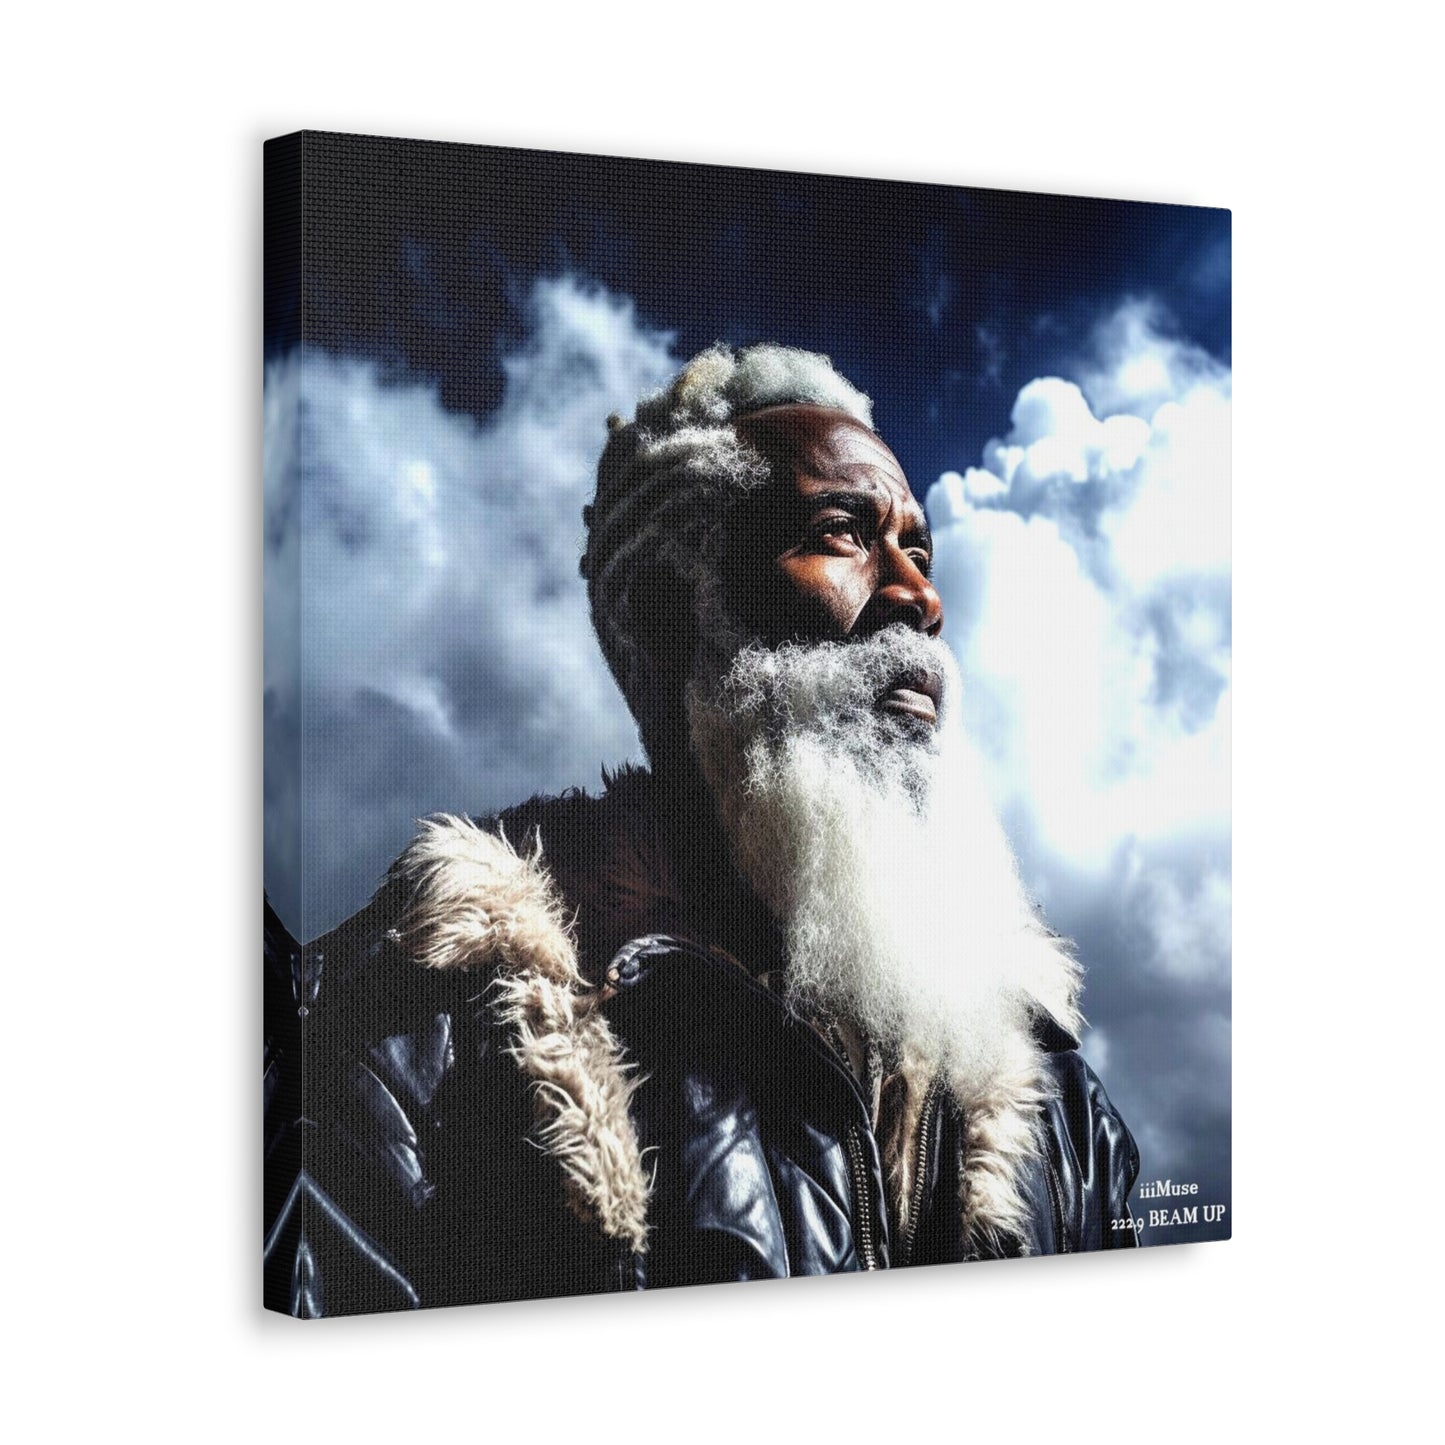 Obatala in Real Time - A Gallery Canvas